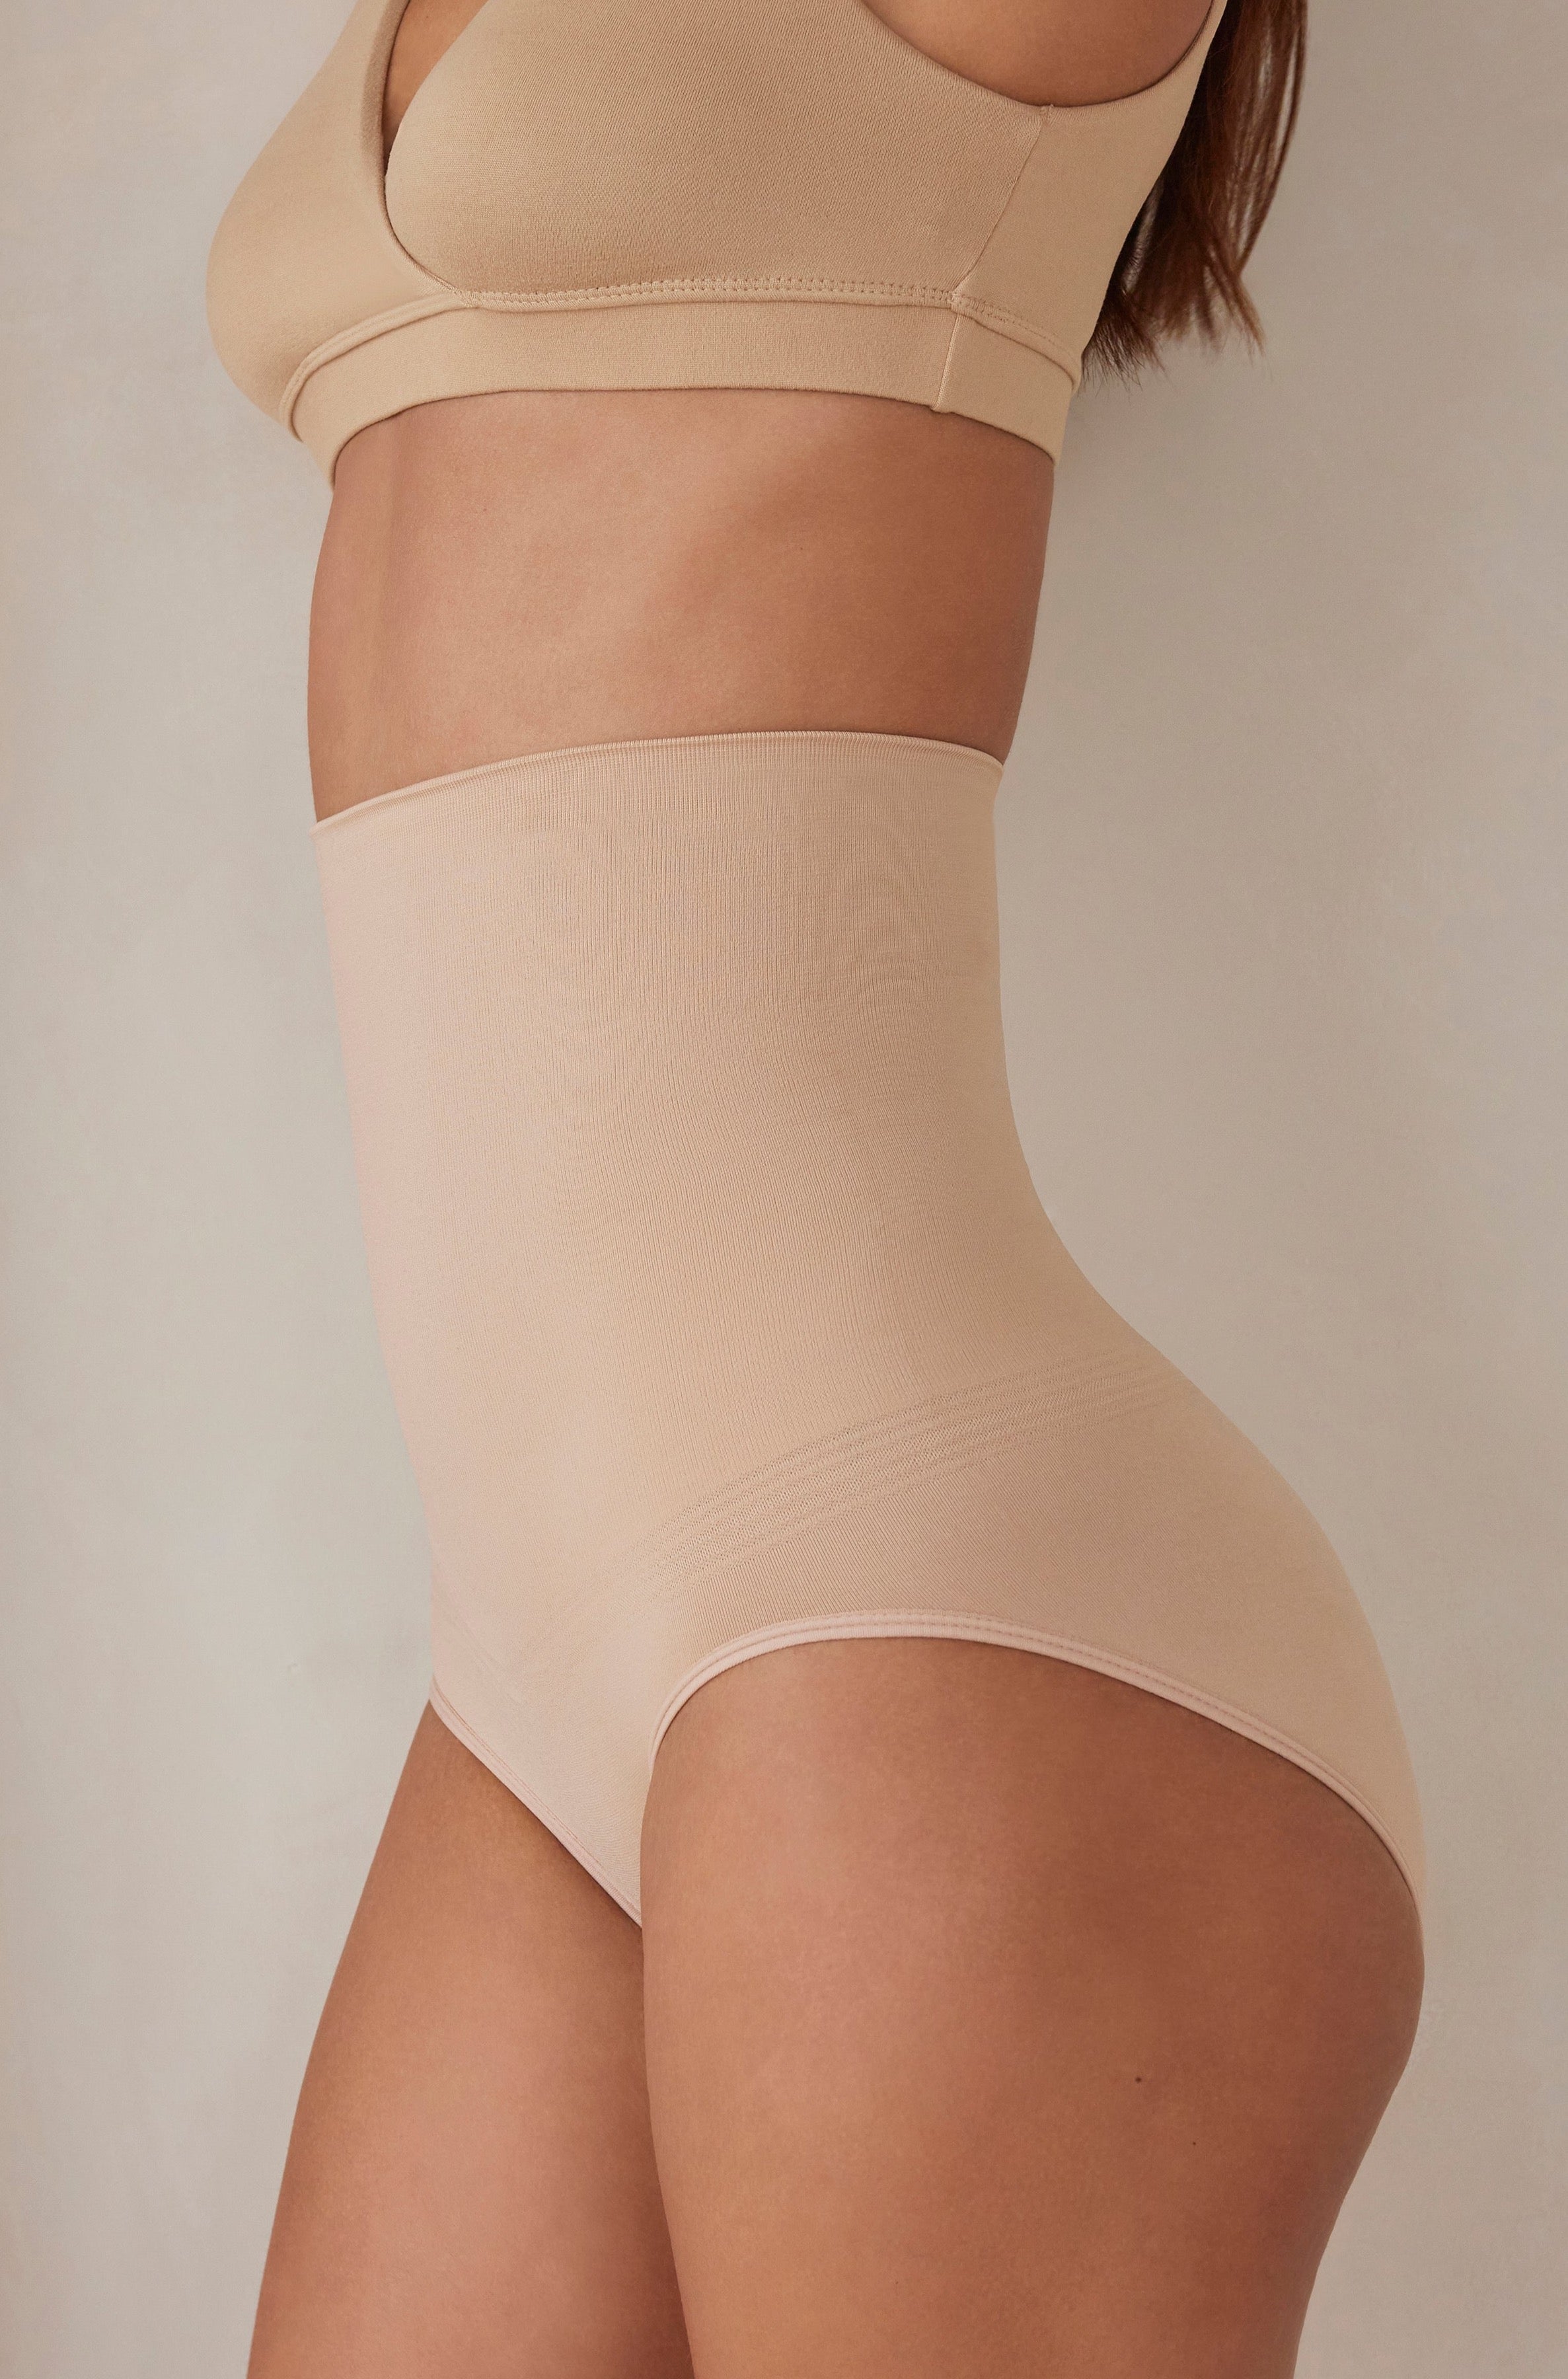 Postnatal Support Brief in beige, Maternity, Active Truth